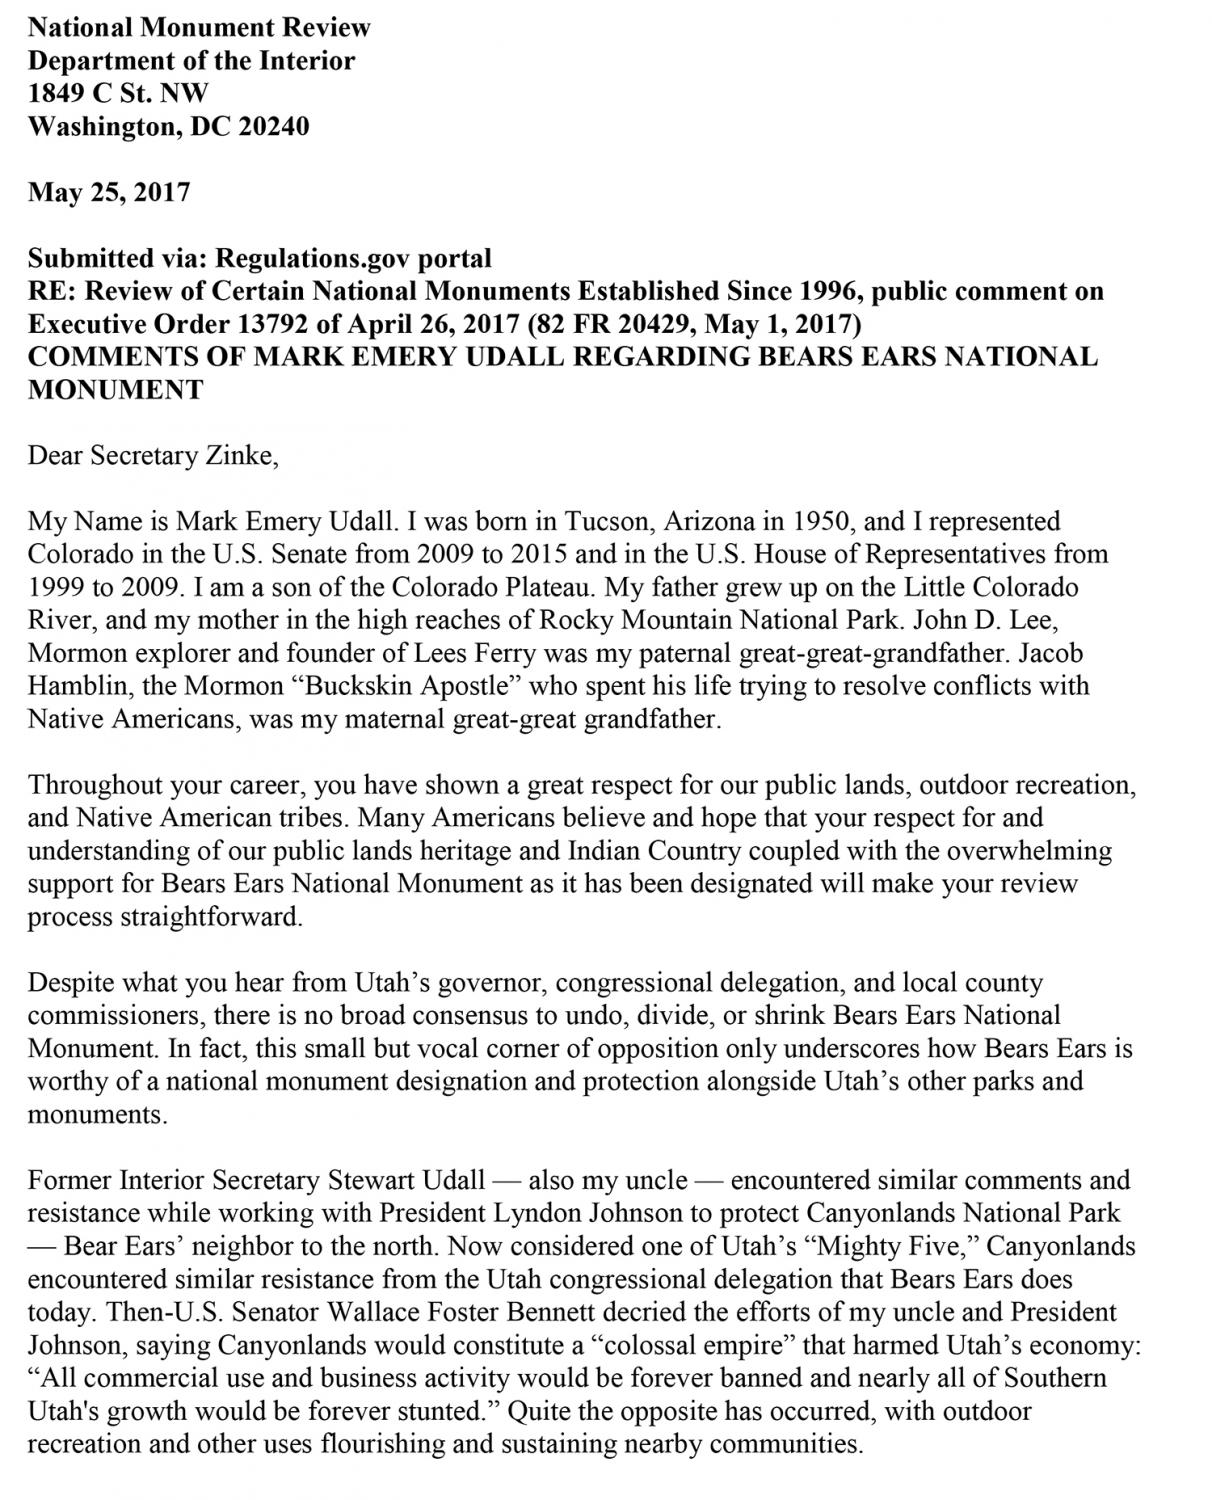 Mark Udall's letter